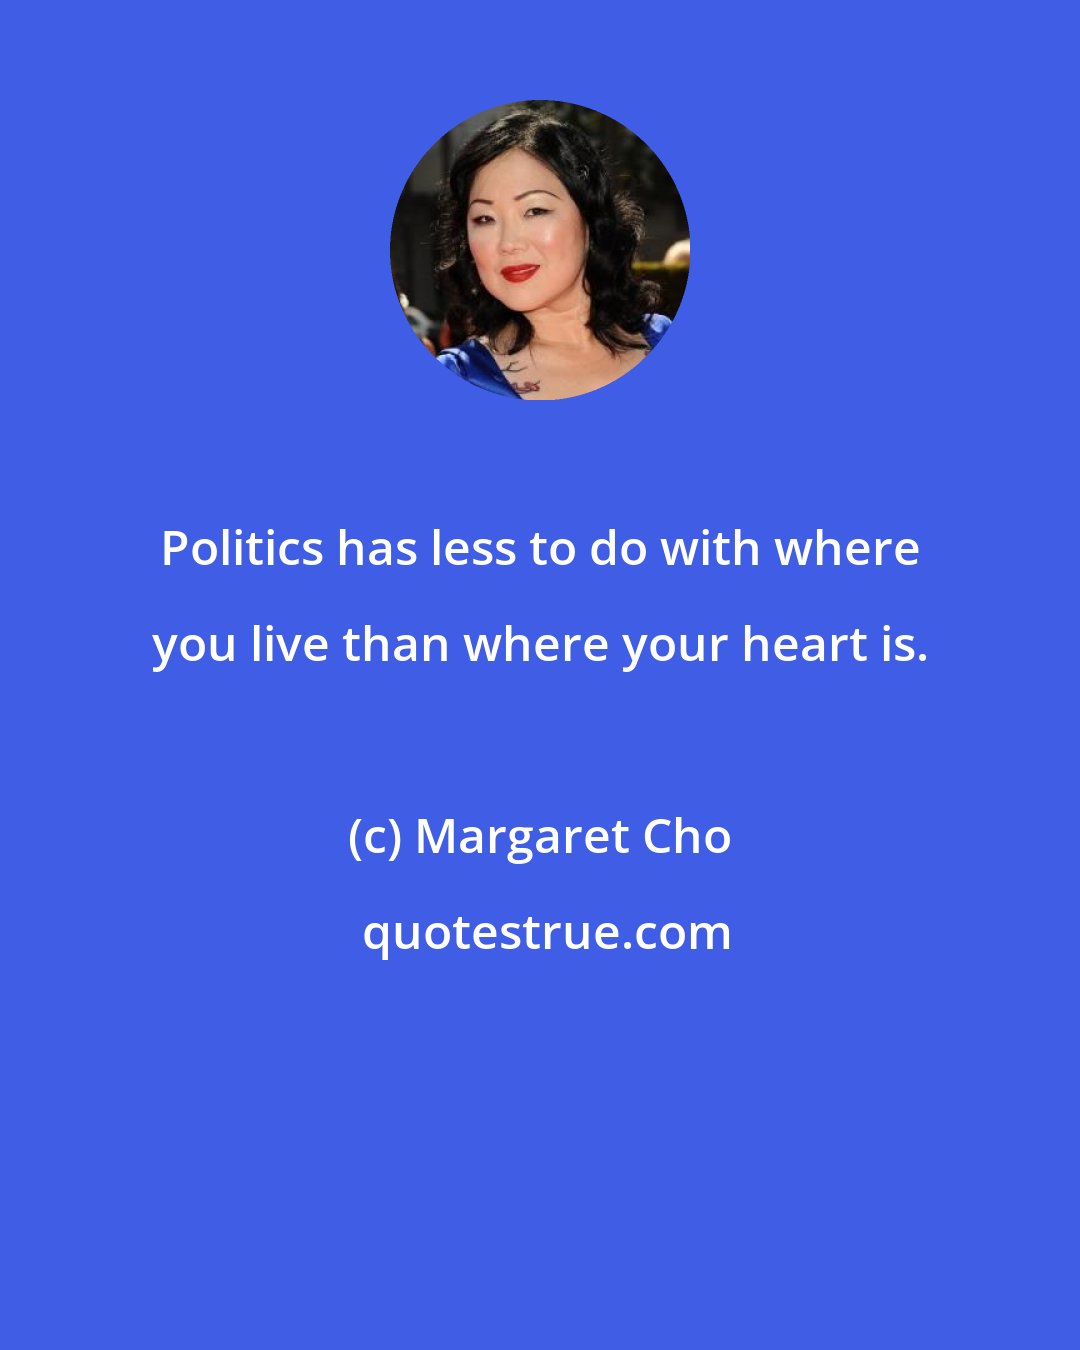 Margaret Cho: Politics has less to do with where you live than where your heart is.